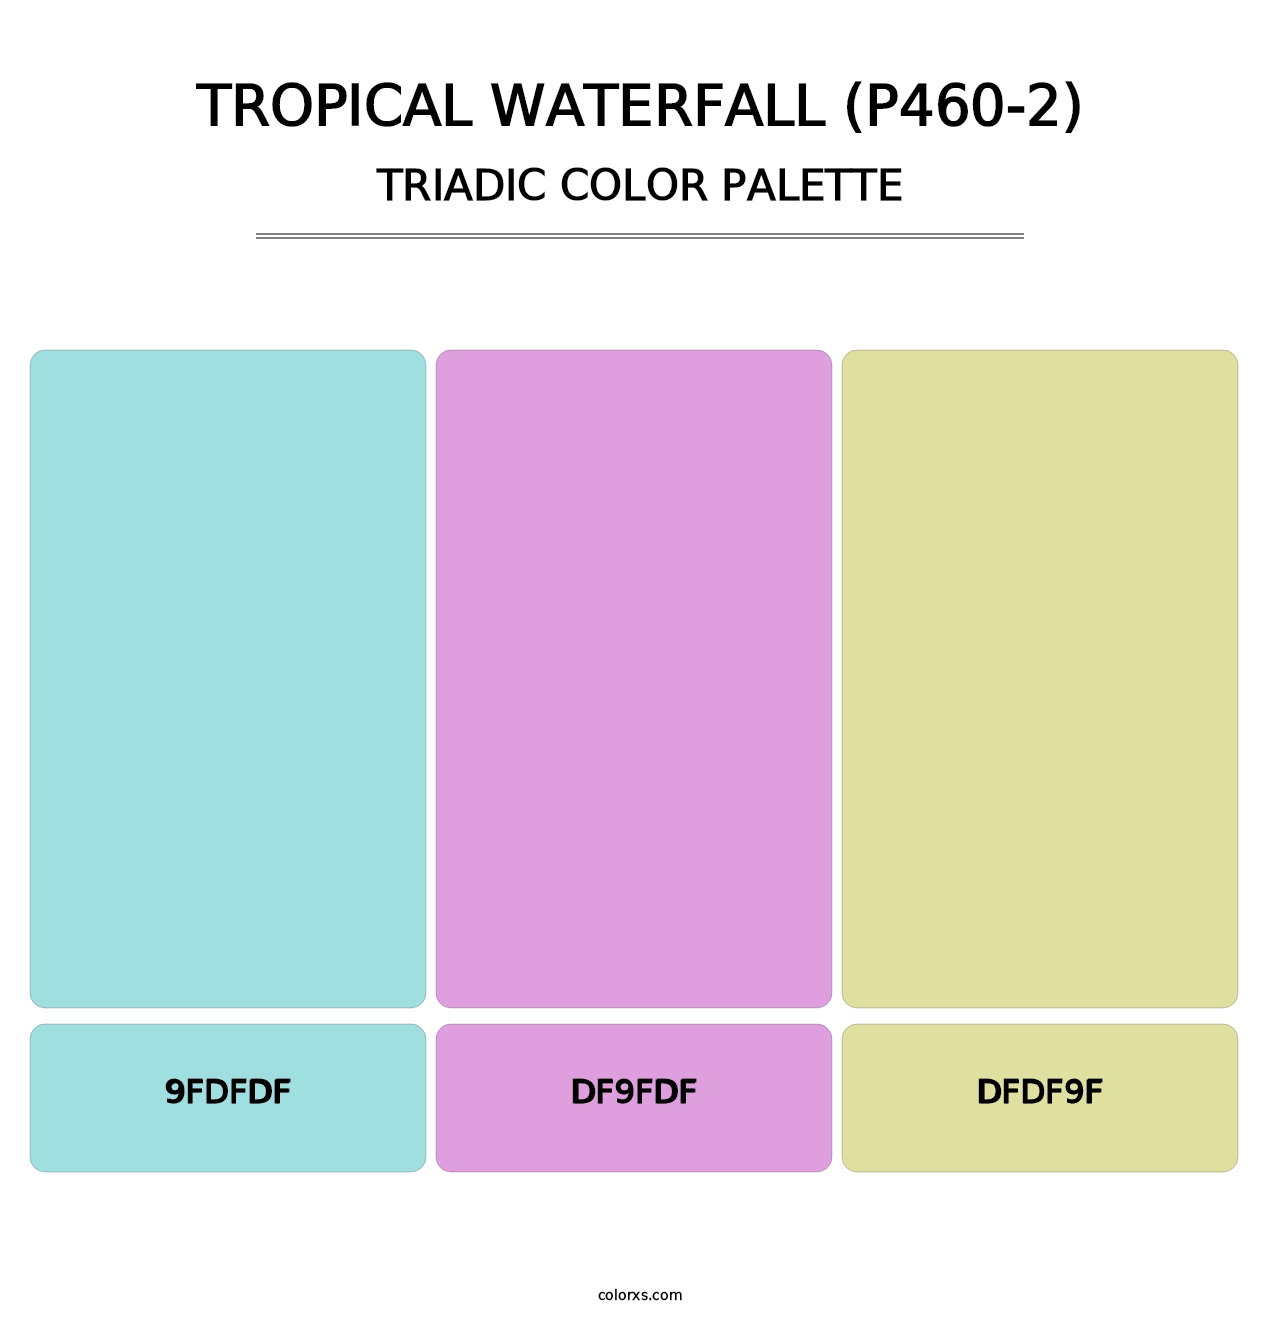 Tropical Waterfall (P460-2) - Triadic Color Palette